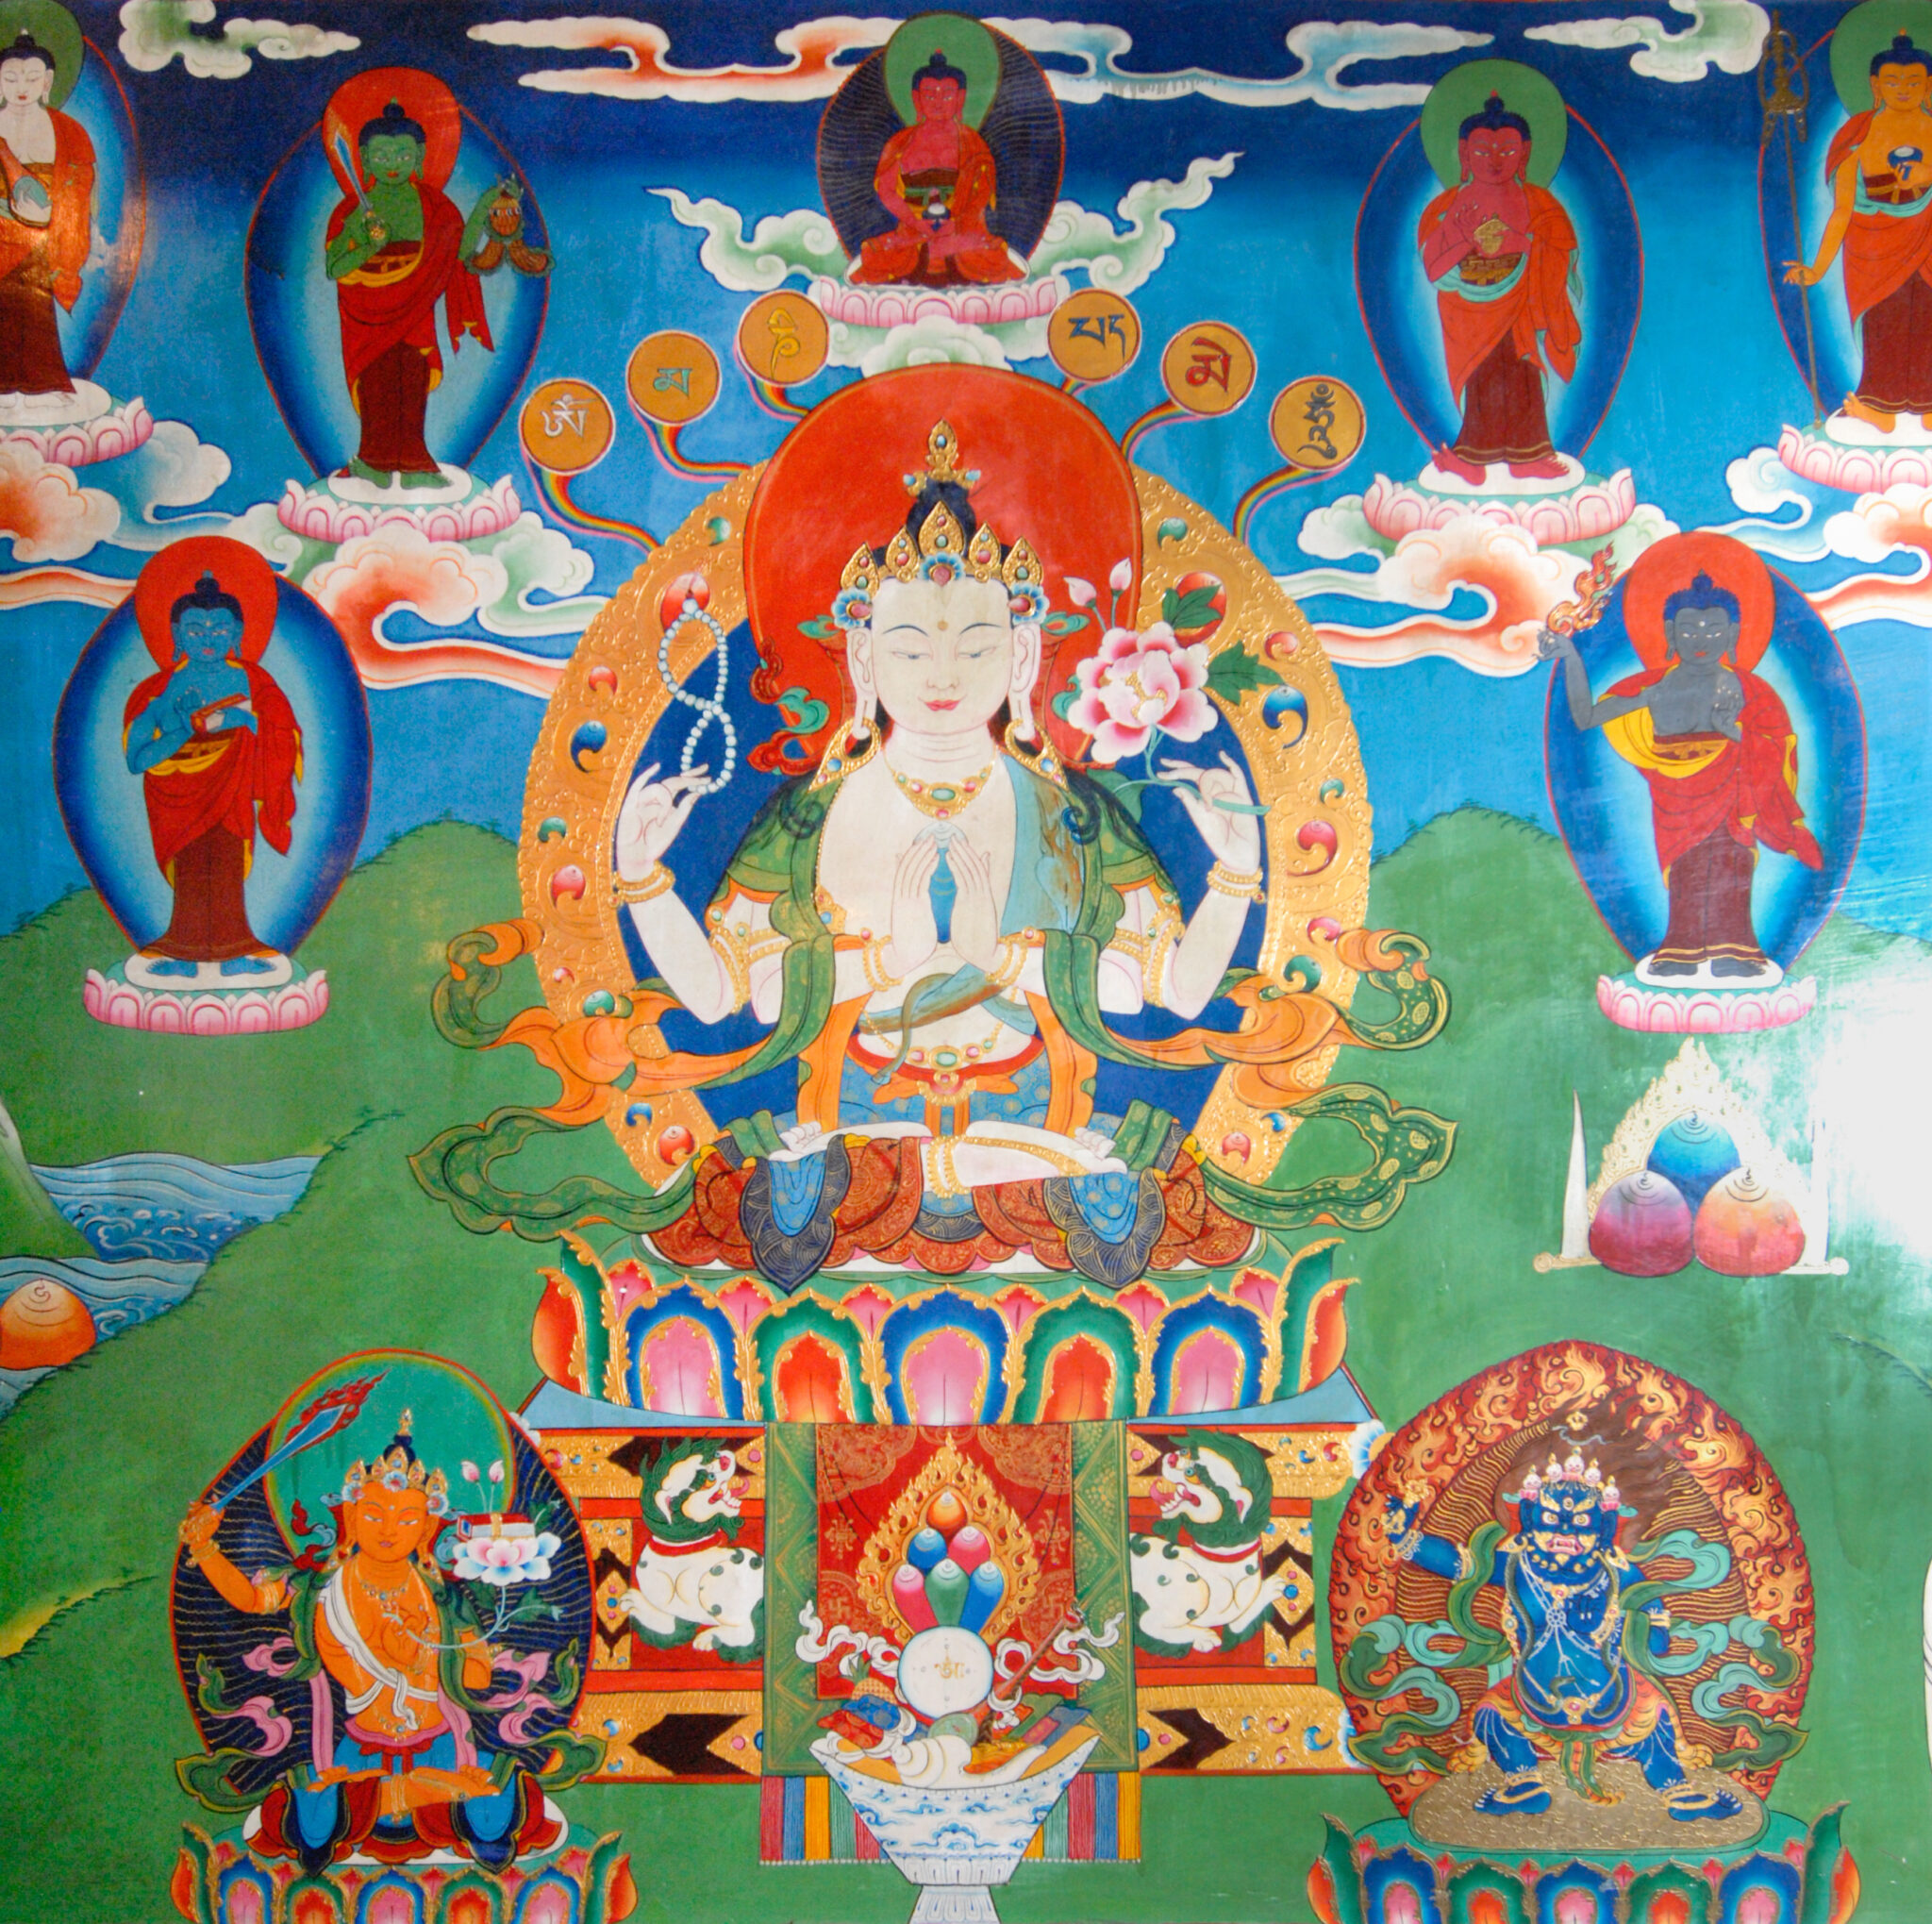 Bodhisattva seated on lotus pedestal at center, surrounded by Buddha and deity portraits, against mountainous background